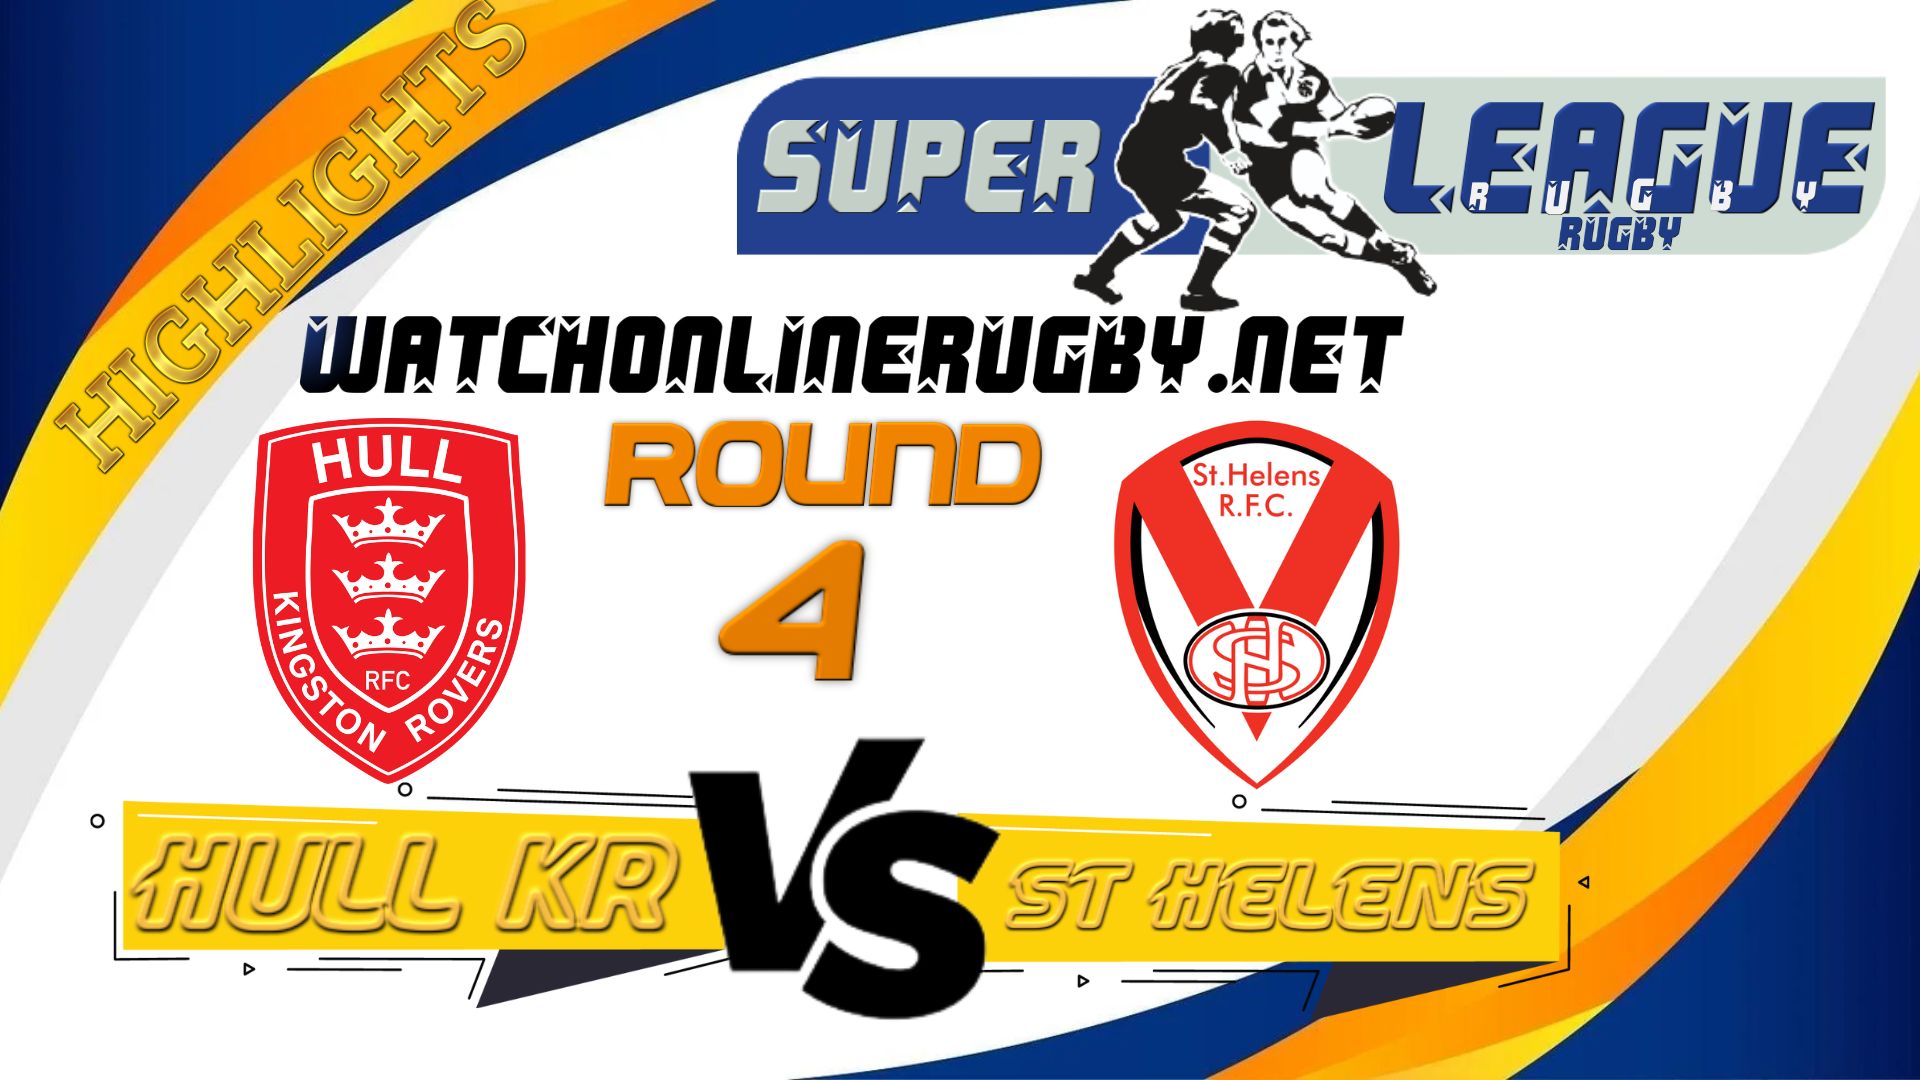 Hull KR Vs St Helens Super League Rugby 2022 RD 4